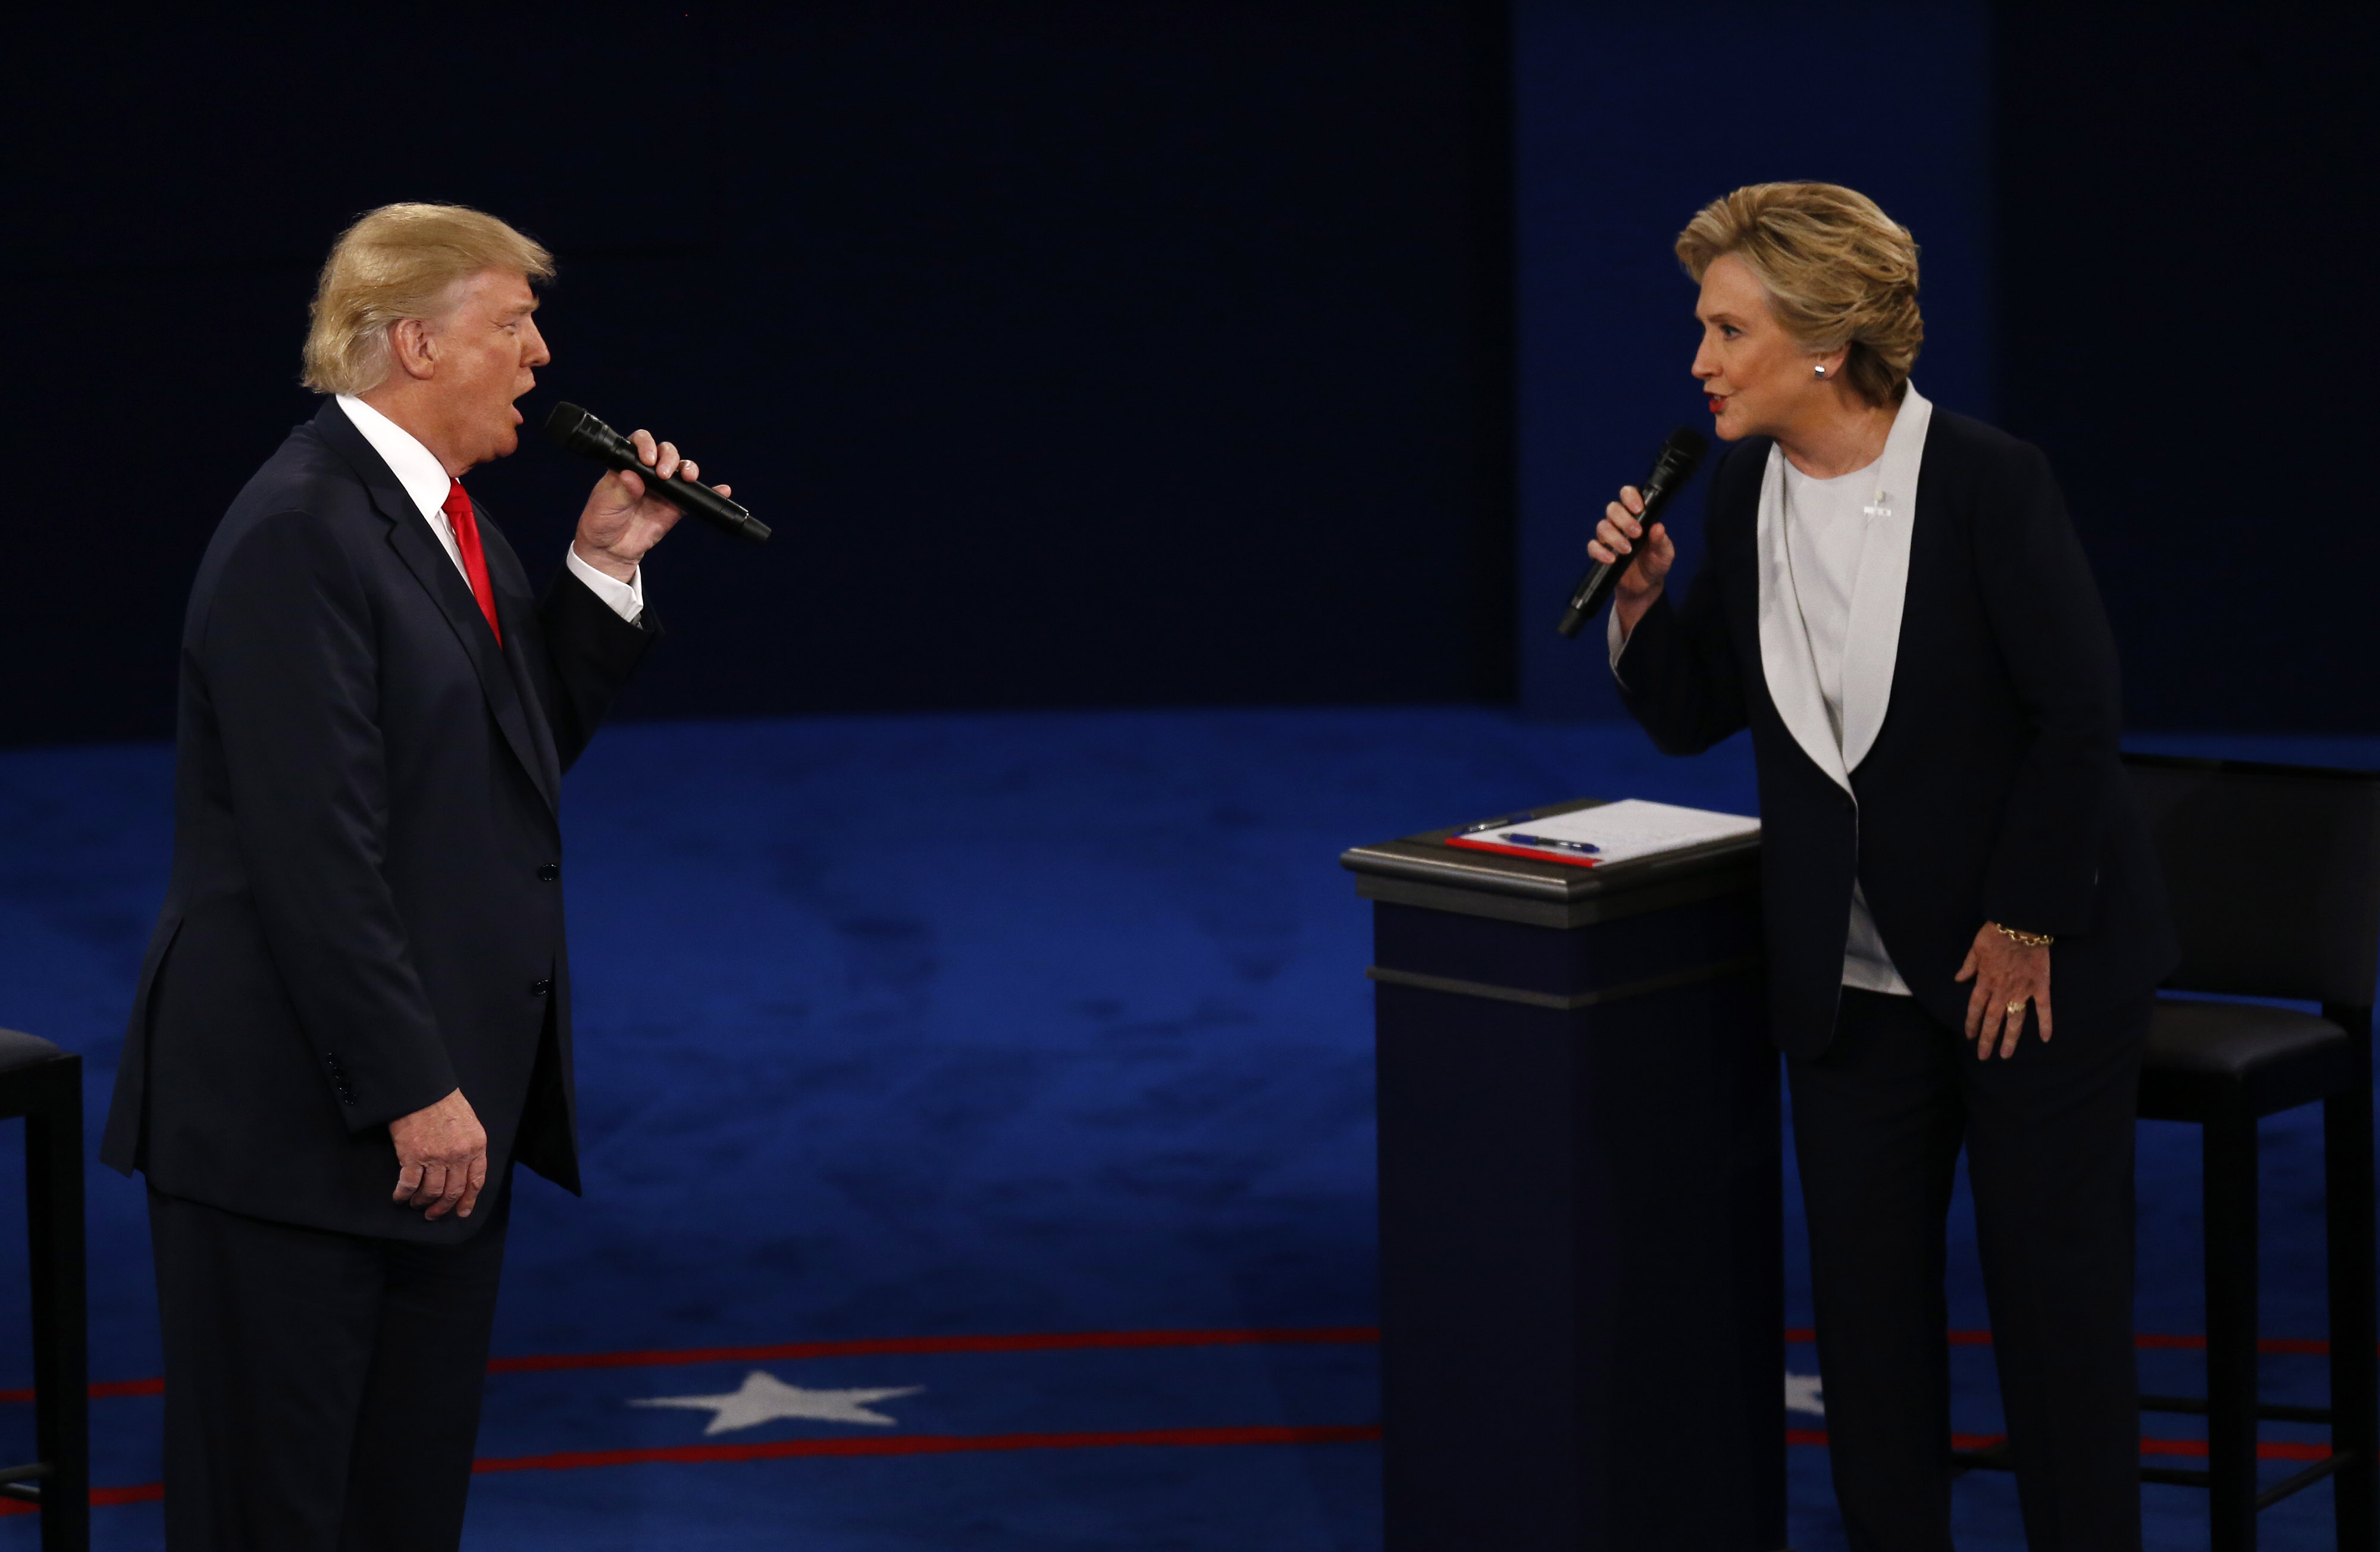 Donald Trump, 2016 Republican presidential nominee, and Hillary Clinton, 2016 Democratic presidential nominee, speak during the second U.S. presidential debate at Washington University in St. Louis, on Oct. 9, 2016. (Bloomberg via Getty Images)